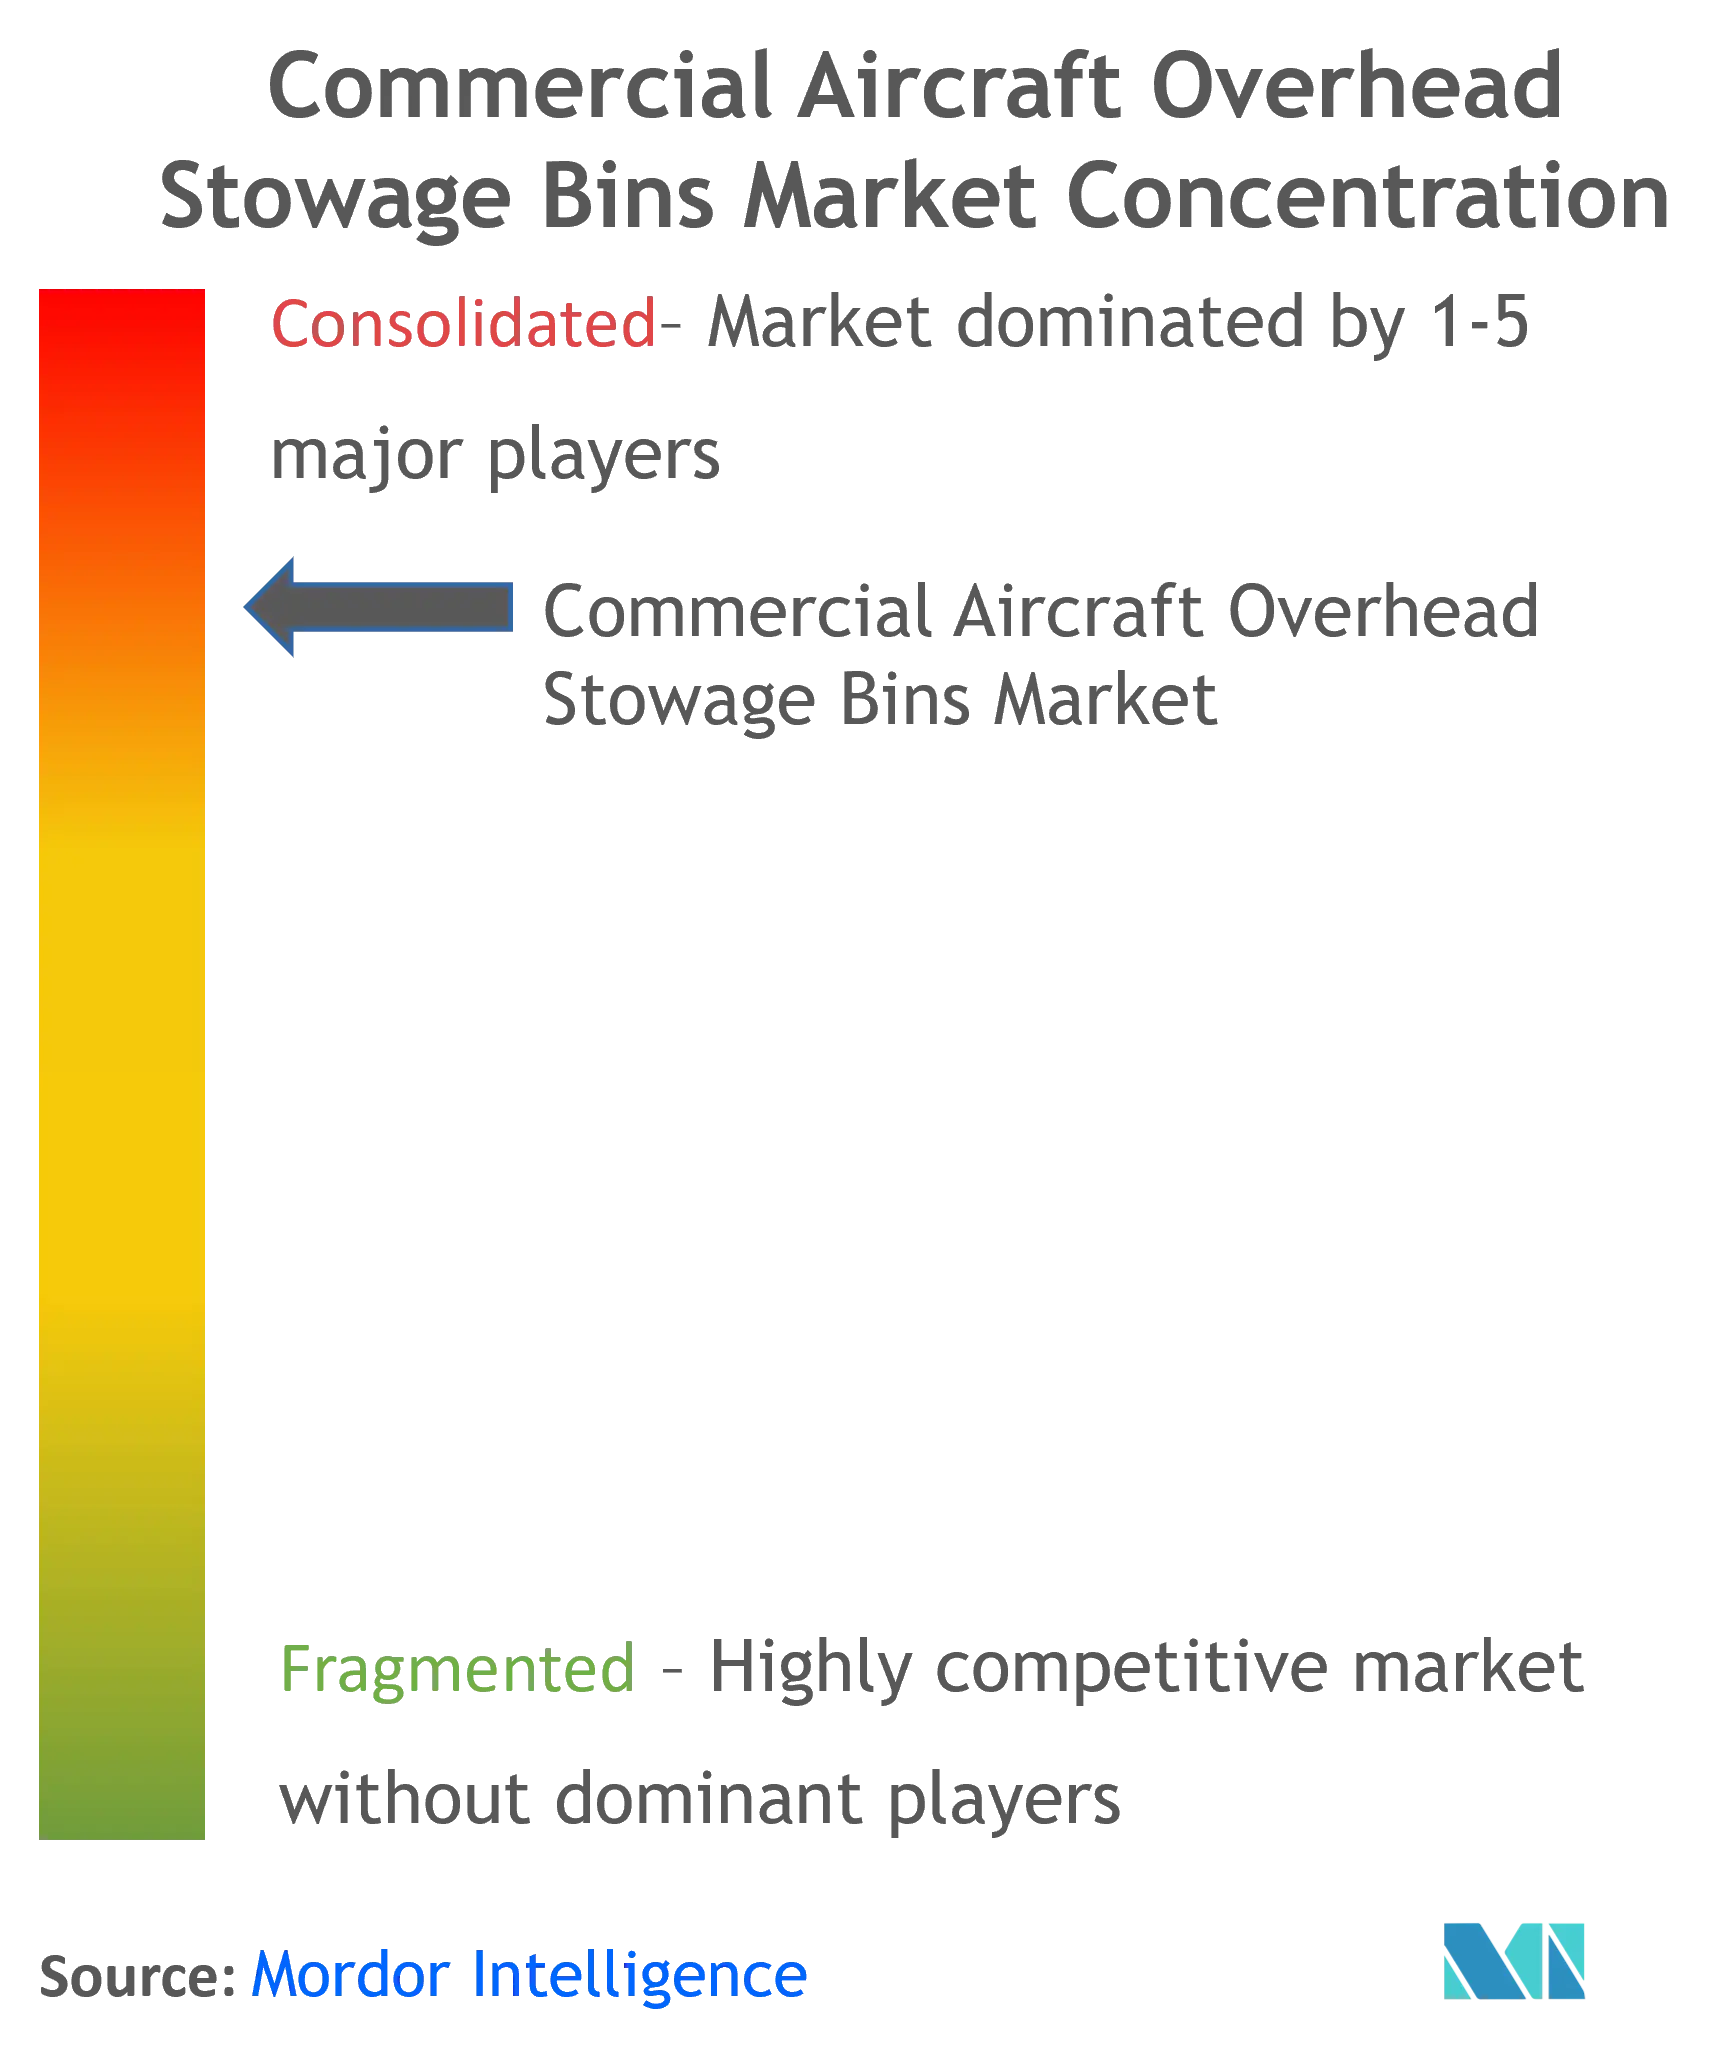 Commercial Aircraft Overhead Stowage Bins Market Concentration